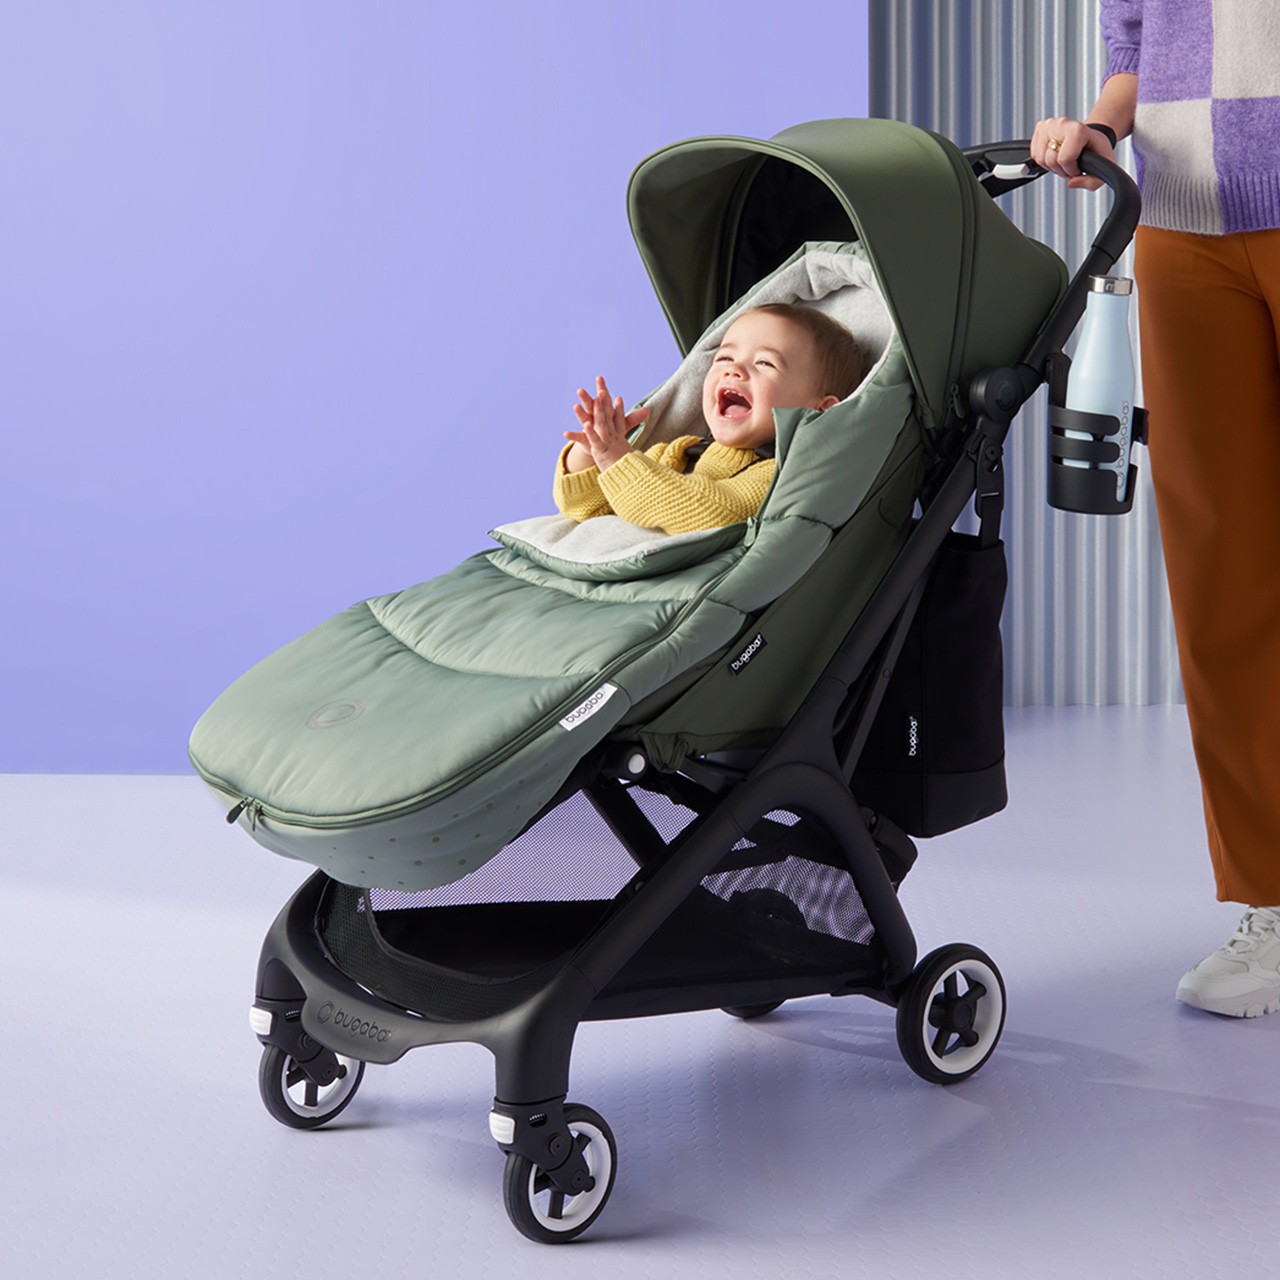 https://cdn11.bigcommerce.com/s-l97wqz3k9m/images/stencil/1280x1280/products/100086/197405/9-BugabooButterfly-CompleteStroller_Black-ForestGreen_100025001__63727.1647960580.jpg?c=1?imbypass=on